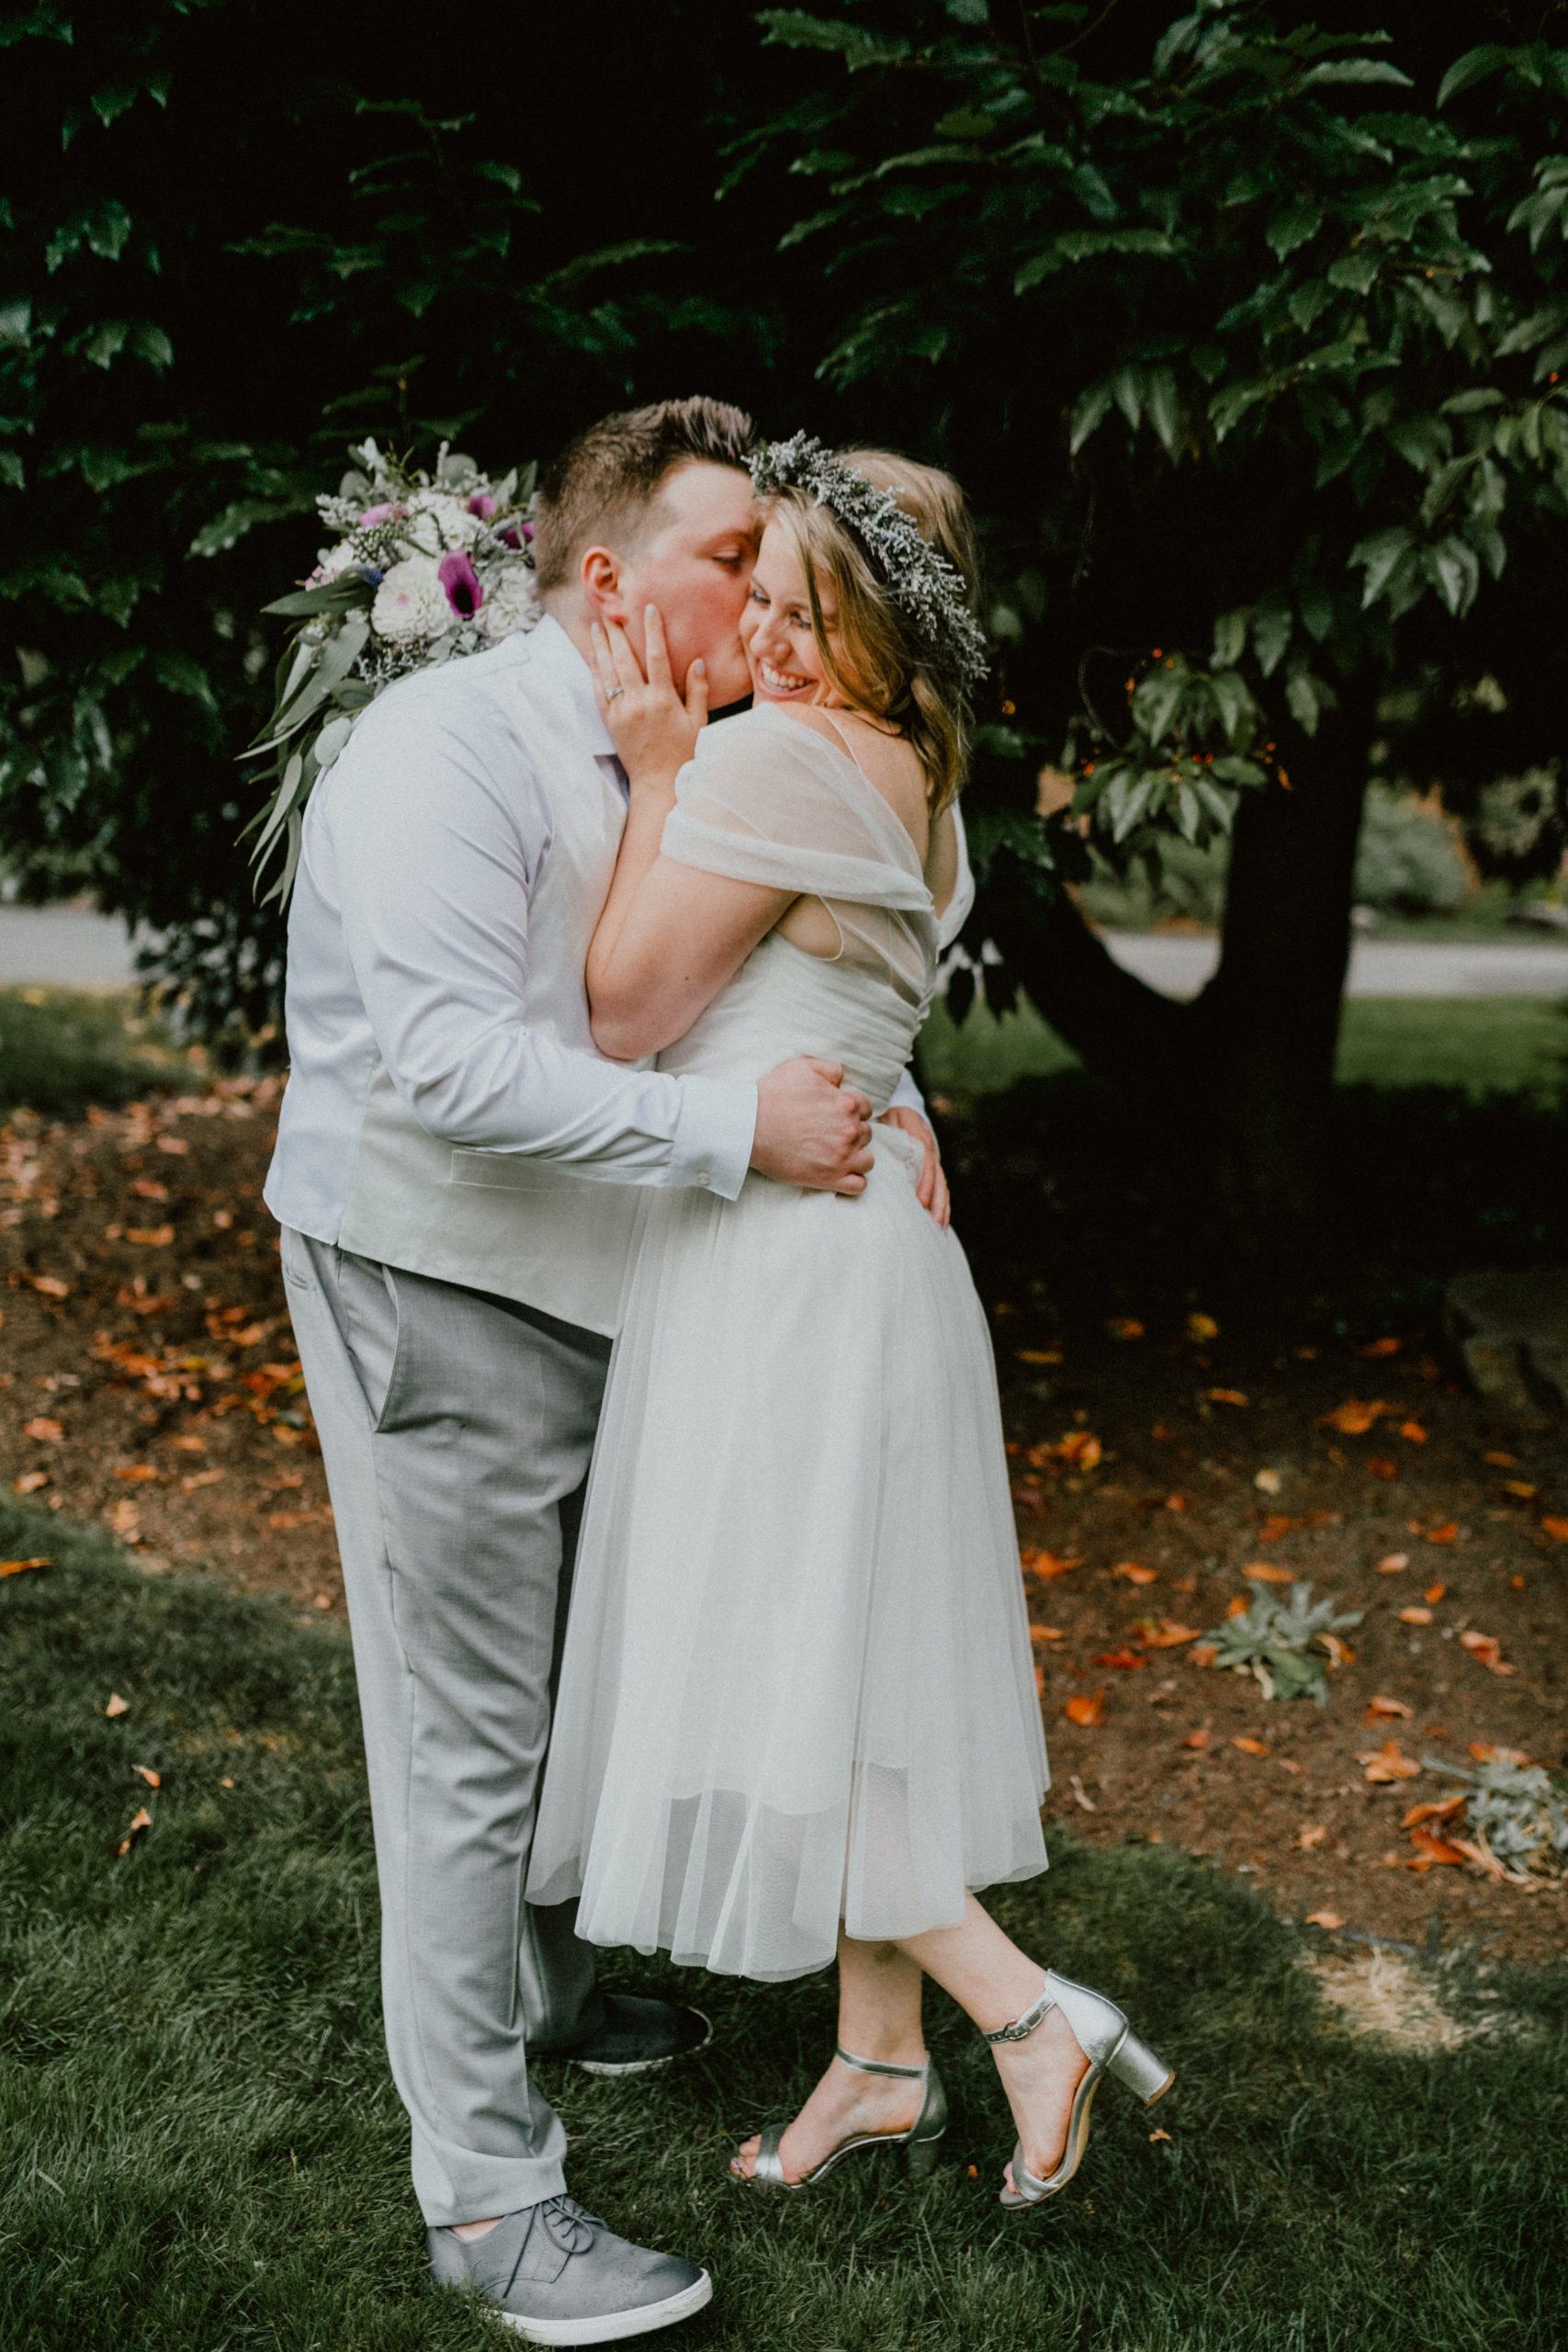 Bride and groom hug each other after backyard wedding, groom kisses bride on the cheek | Seattle Wedding Photographer, Seattle Elopement Photographer | chelseaabril.com